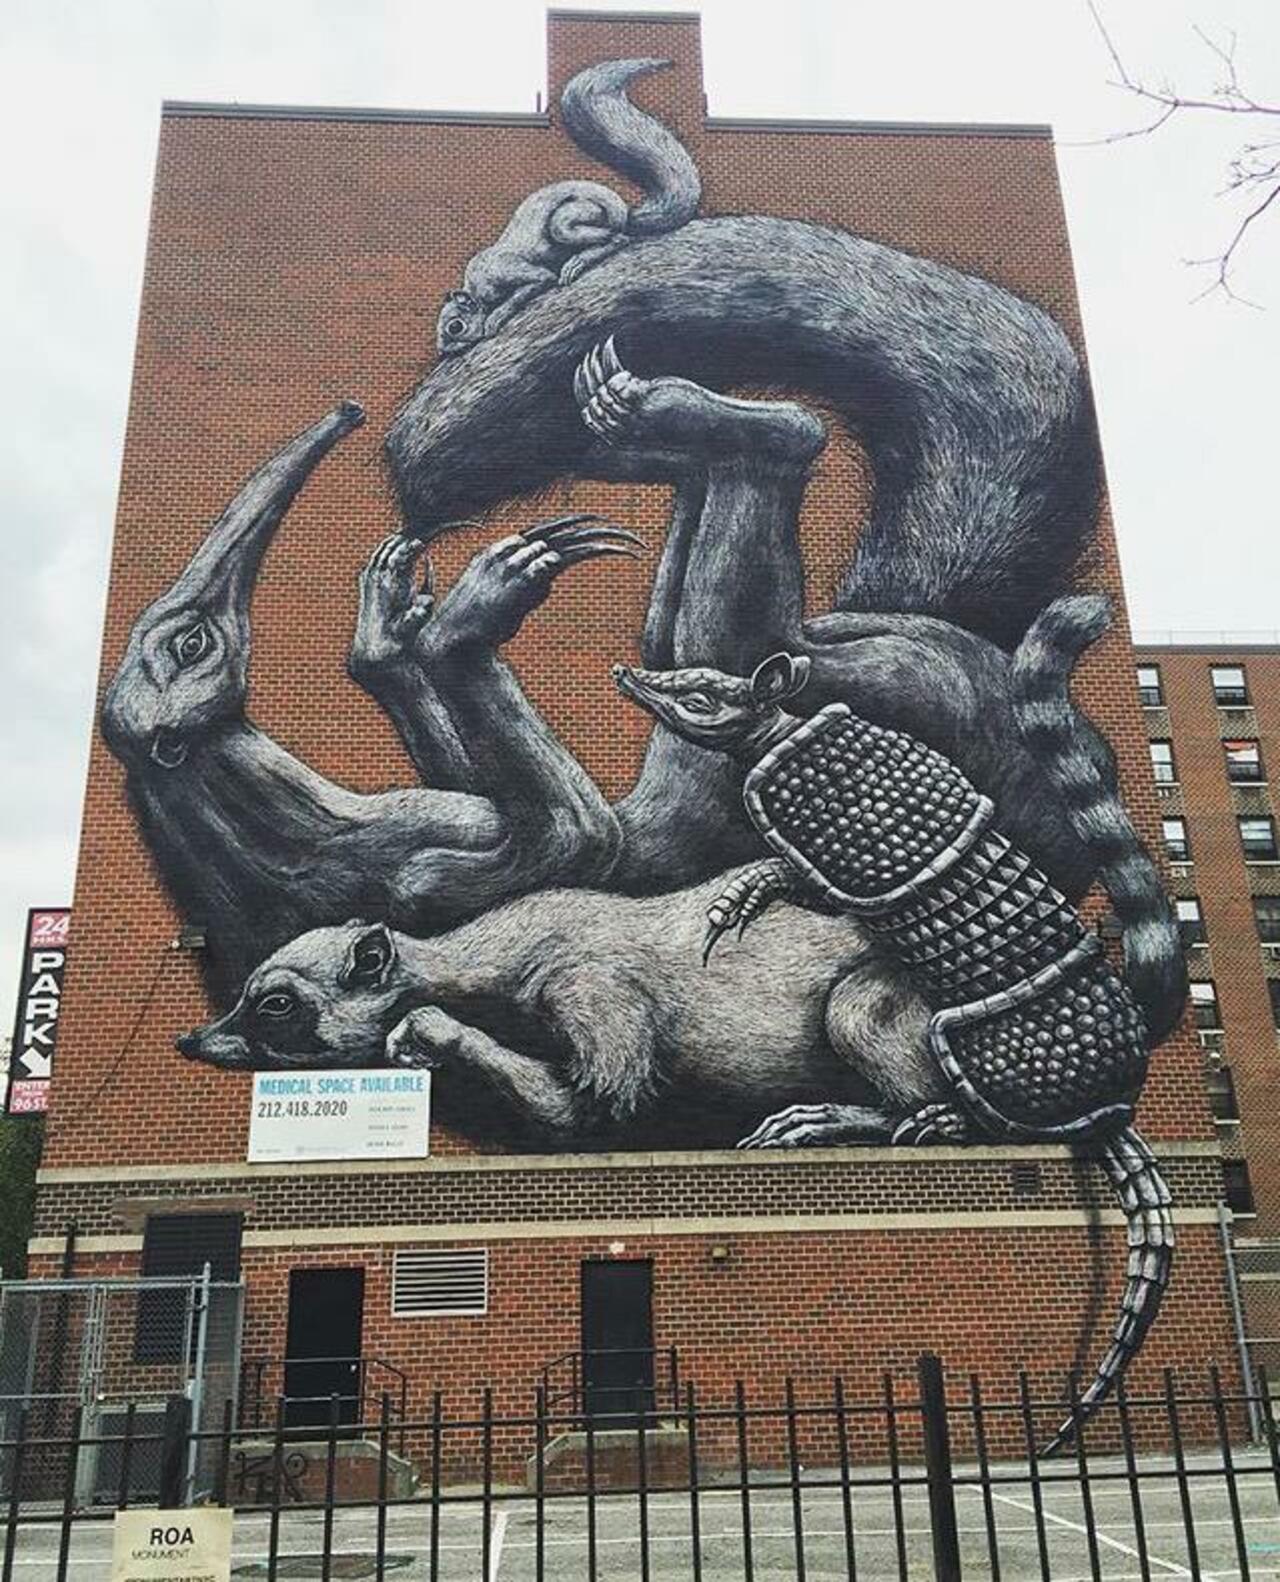 The completed new large scale Street Art wall by ROA in NYC

#art #graffiti #mural #streetart http://t.co/Ekq2k7Qk3S